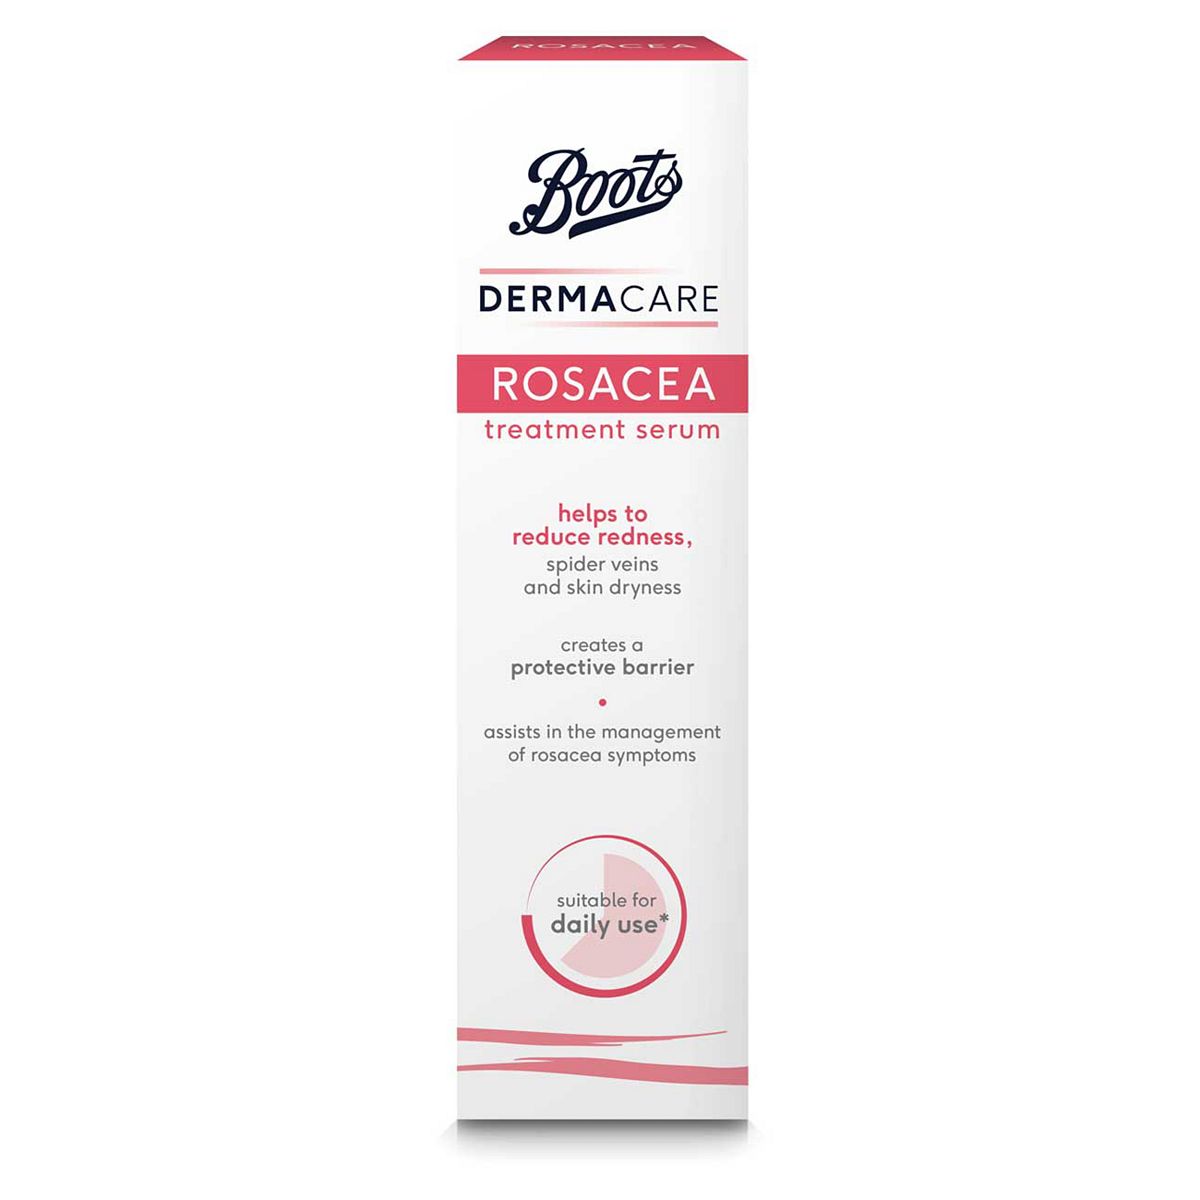 Boots Dermacare Rosacea Treatment Serum 25ml First Aid Boots   